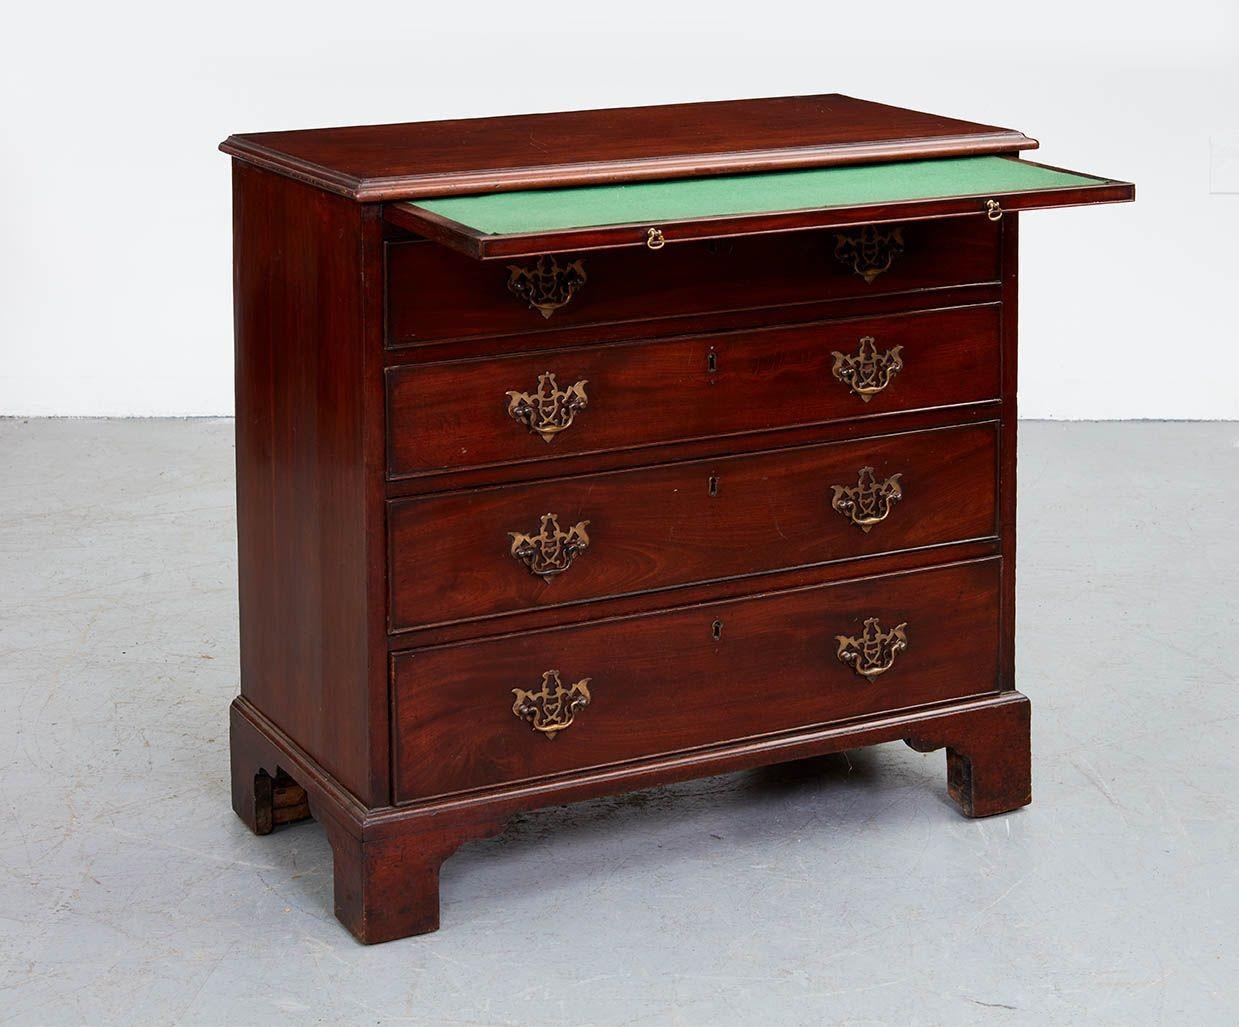 Good George III mahogany bachelor's chest, the top with ogee molded edge over green cloth lined brushing or writing slide, over four graduated drawers and standing on well-drawn bracket feet, the whole with mellow pleasing color. Pierced brasses